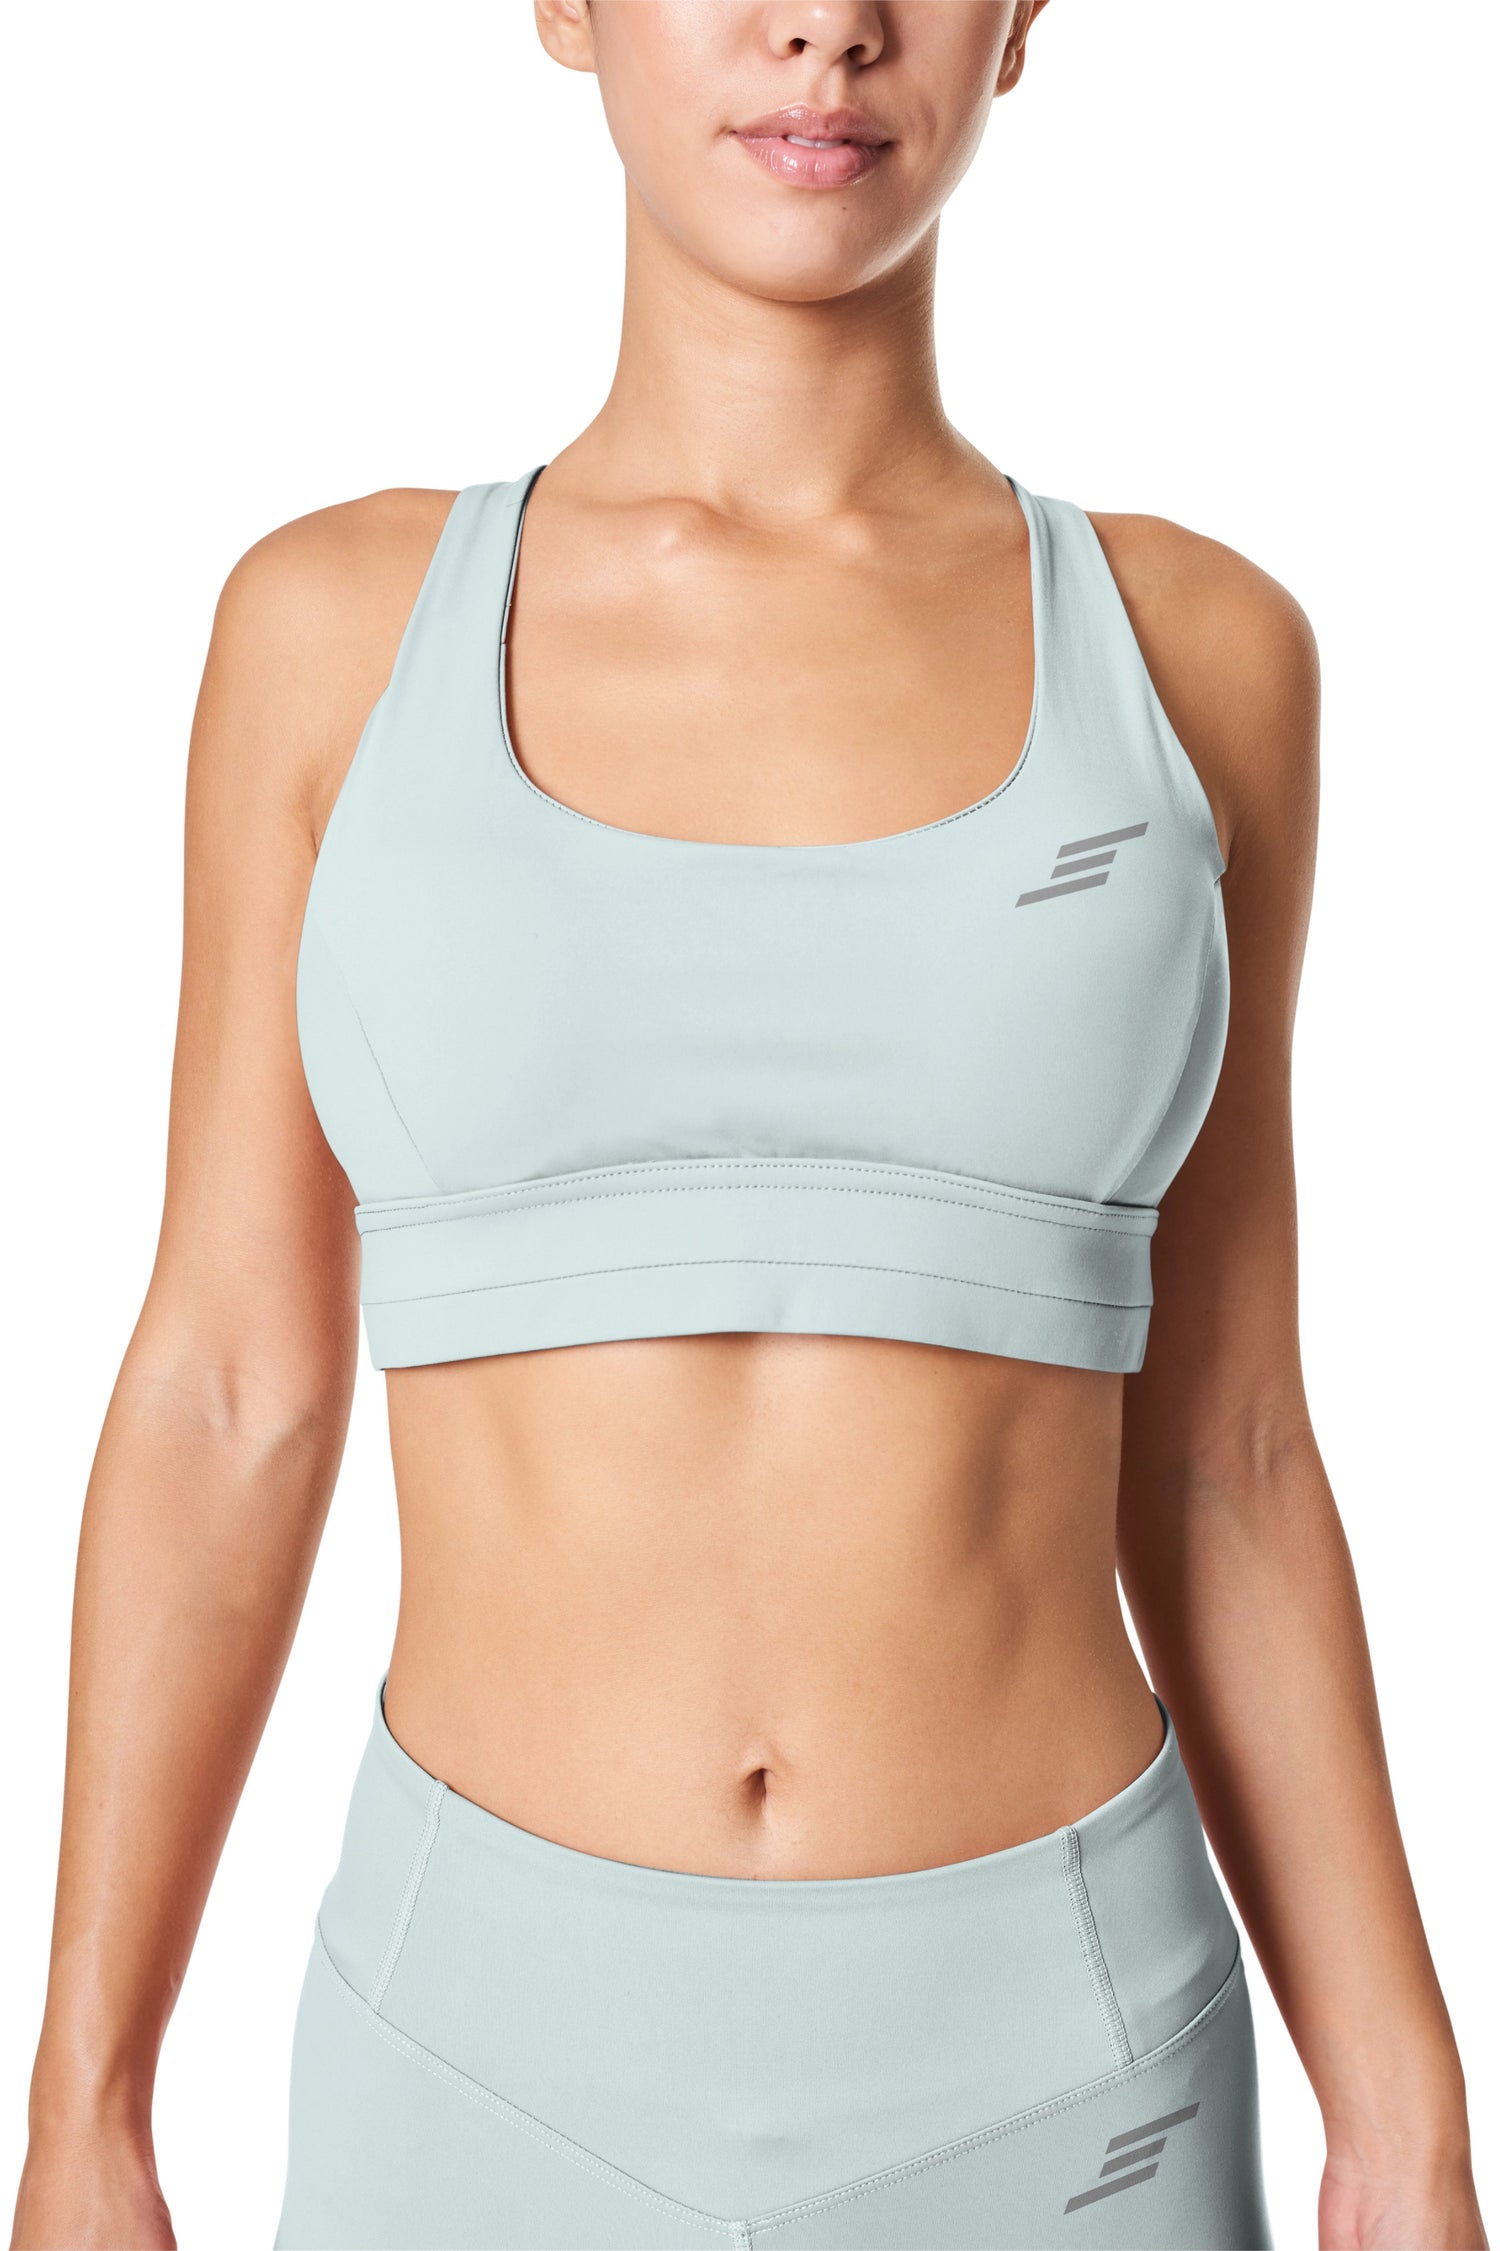 elevated womens sports clothing